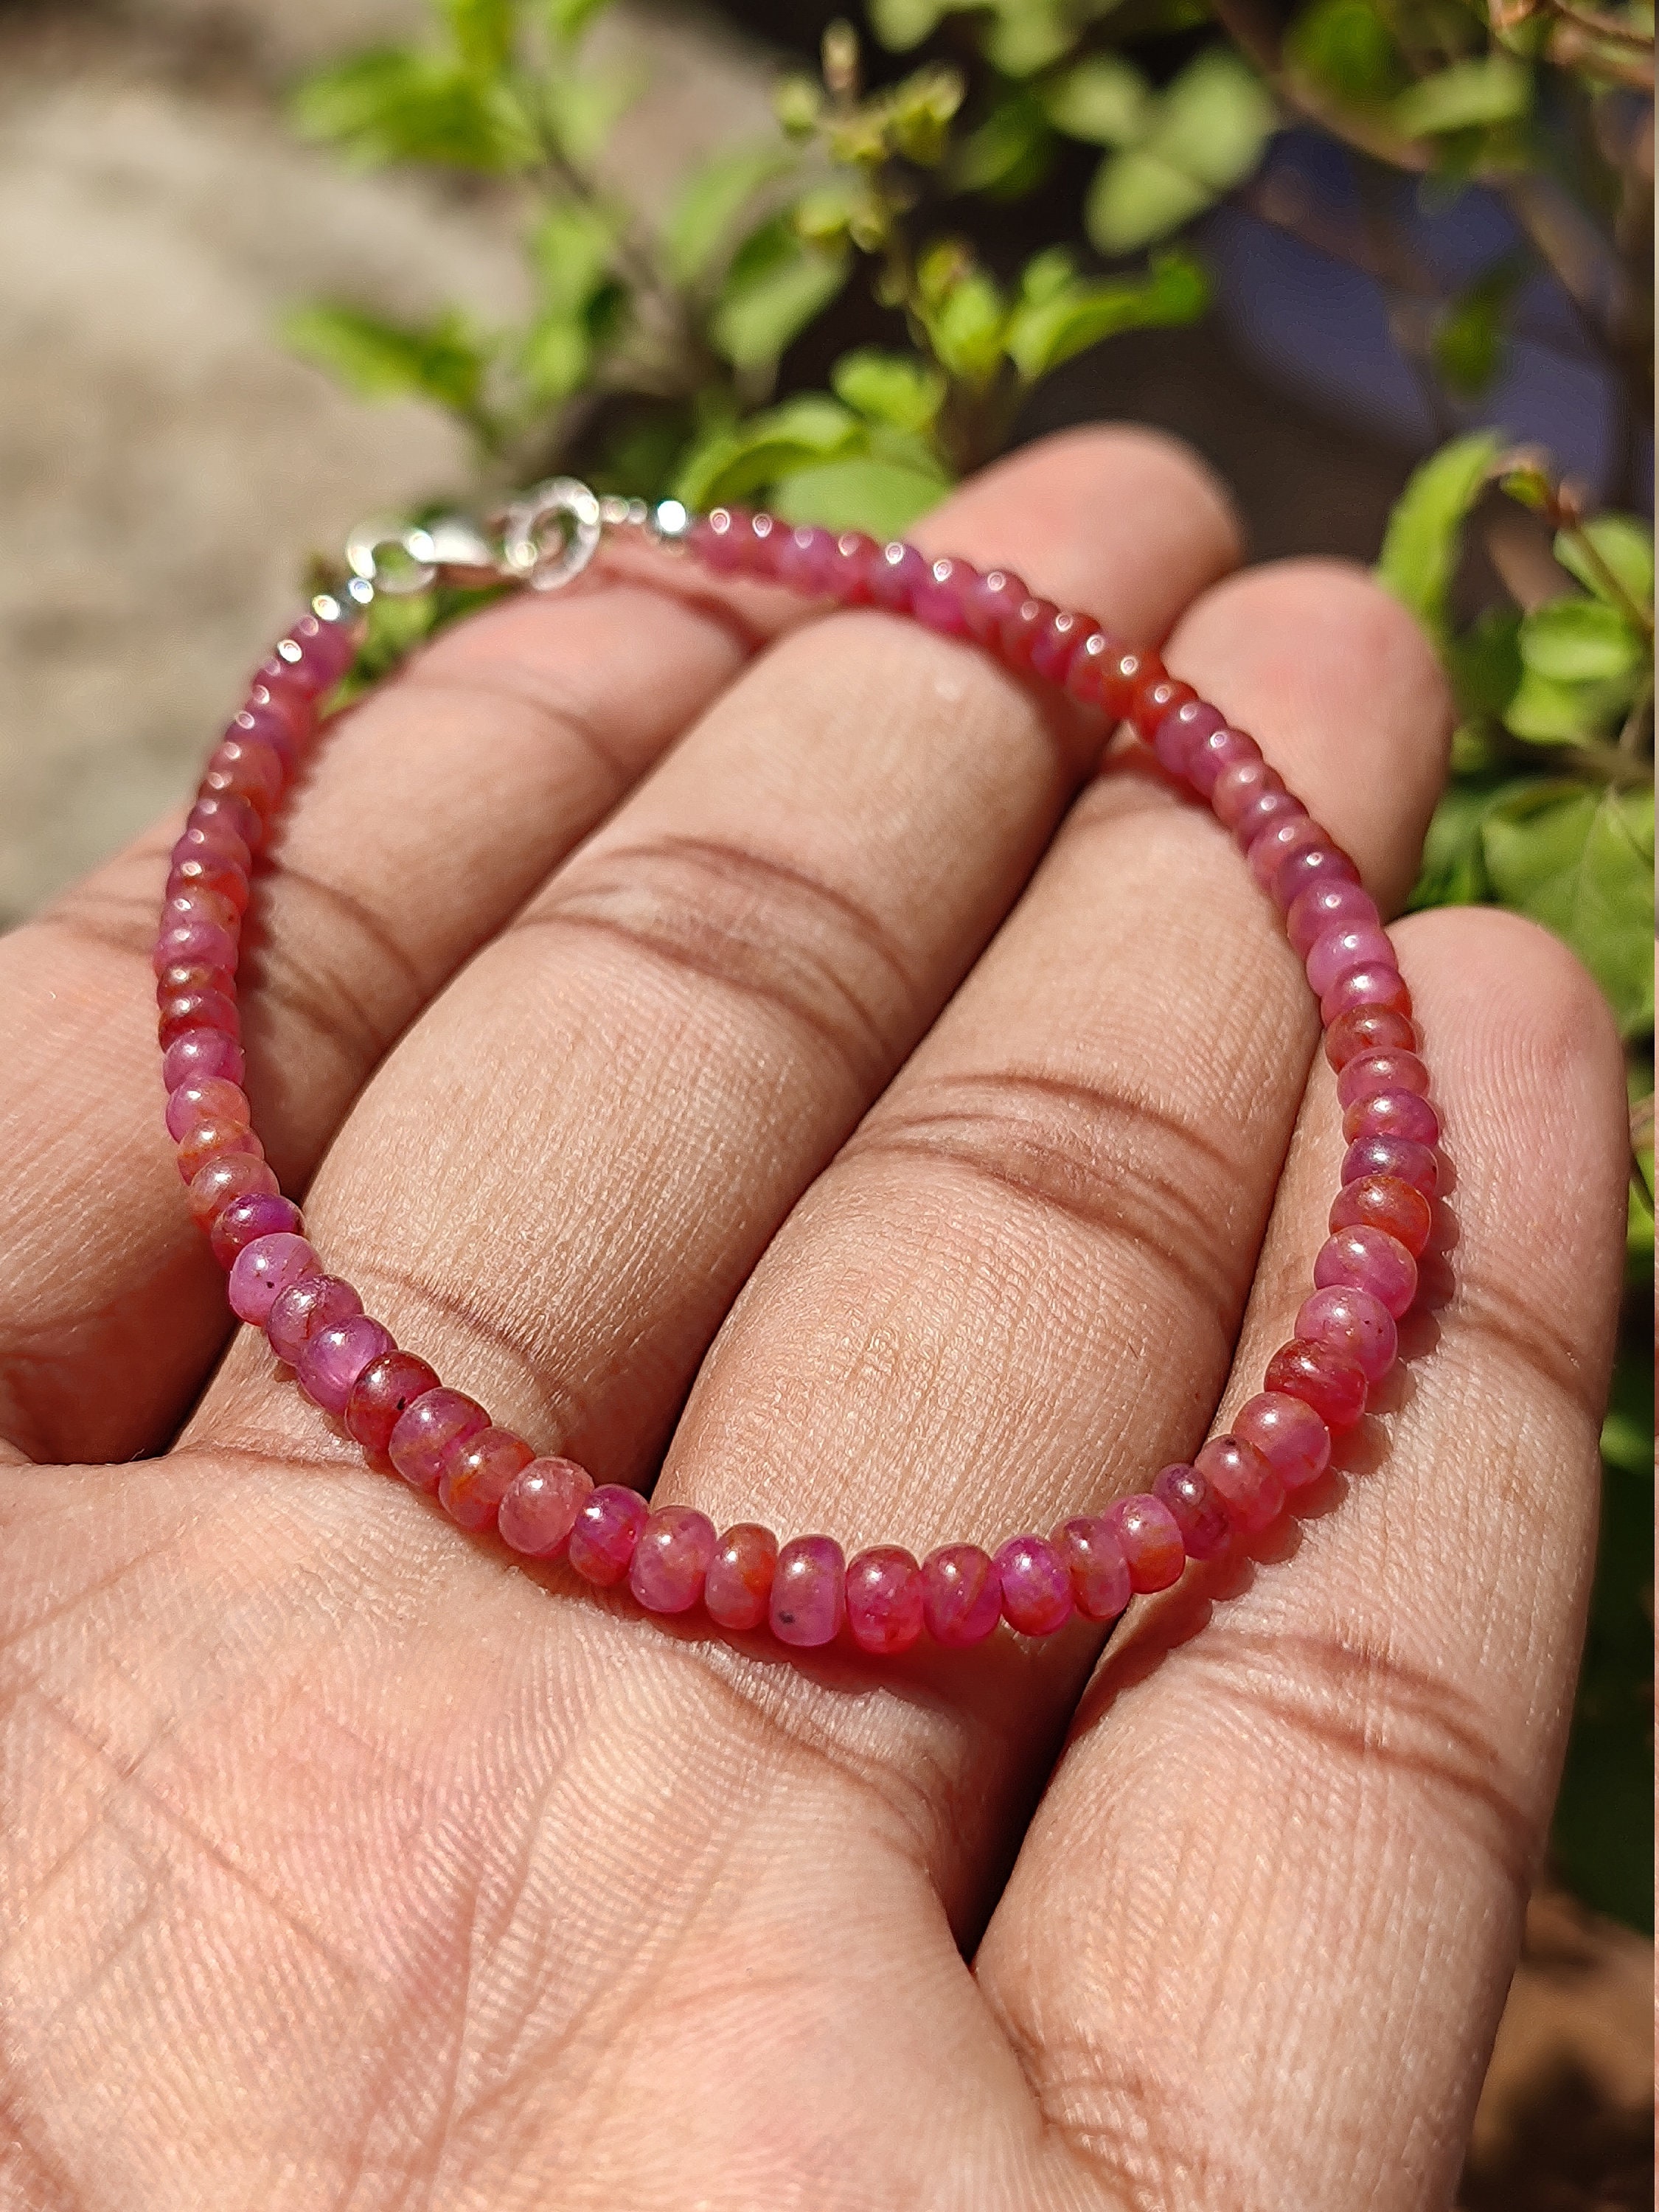 Amazon.com: Genuine Ombre Ruby Bracelet with Solid Sterling Silver Chain  Extender 1 inch,July Birthstone, Size - 6.5,7,7.5,8,8.5 : Handmade Products